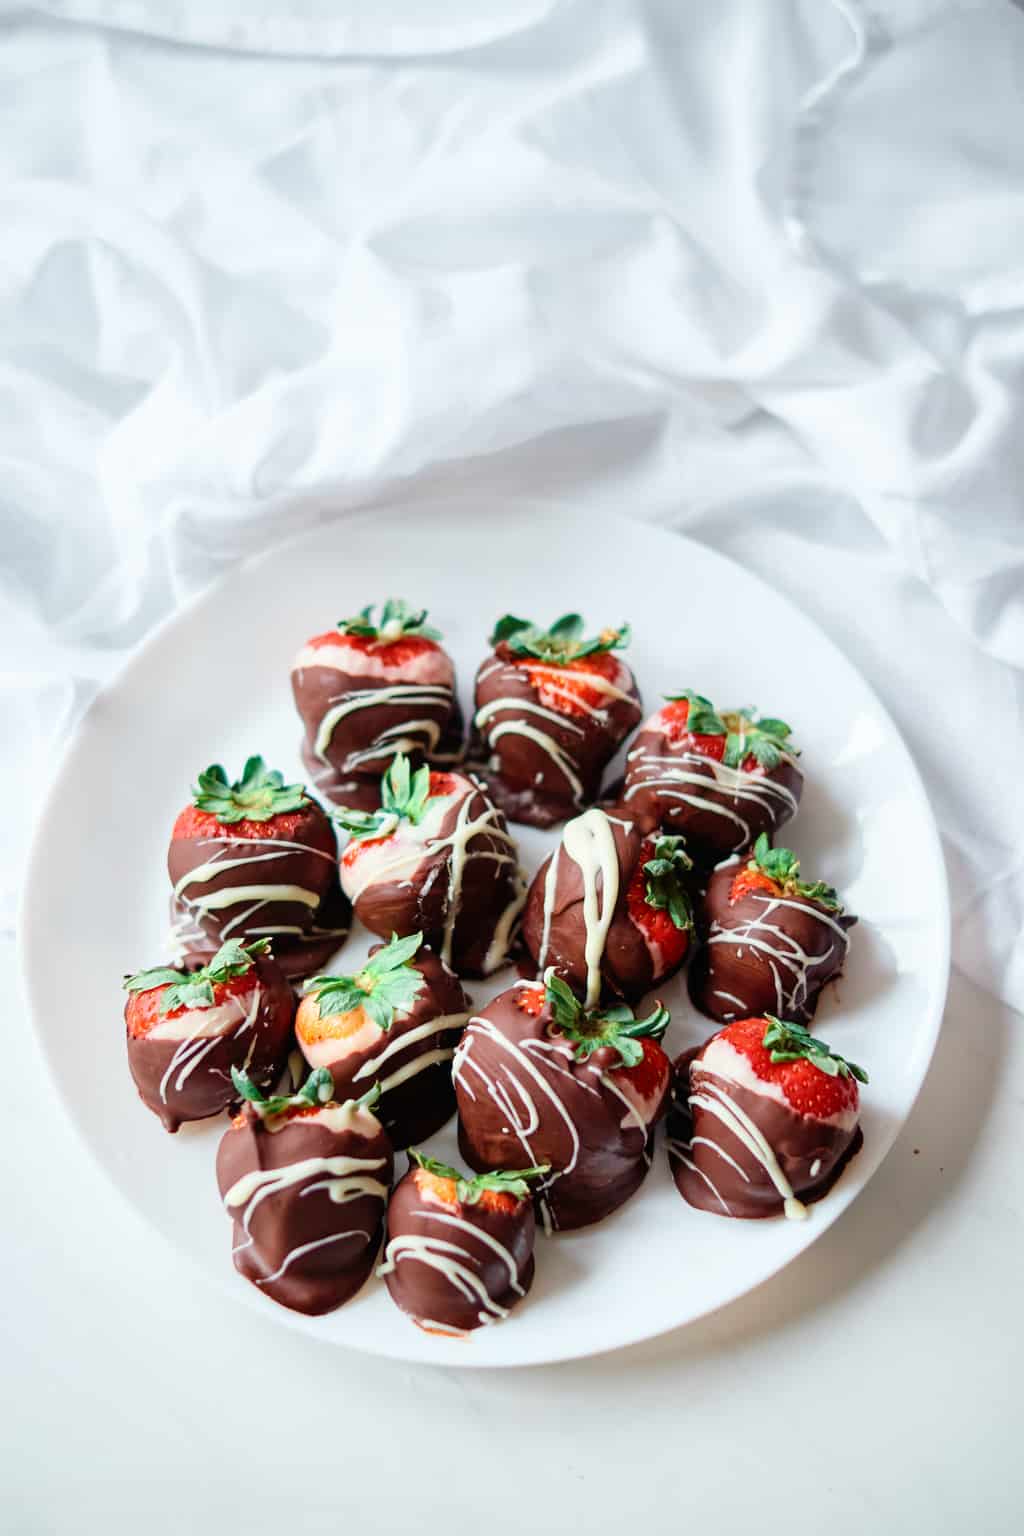 a plate filled with chocolate covered strawberries